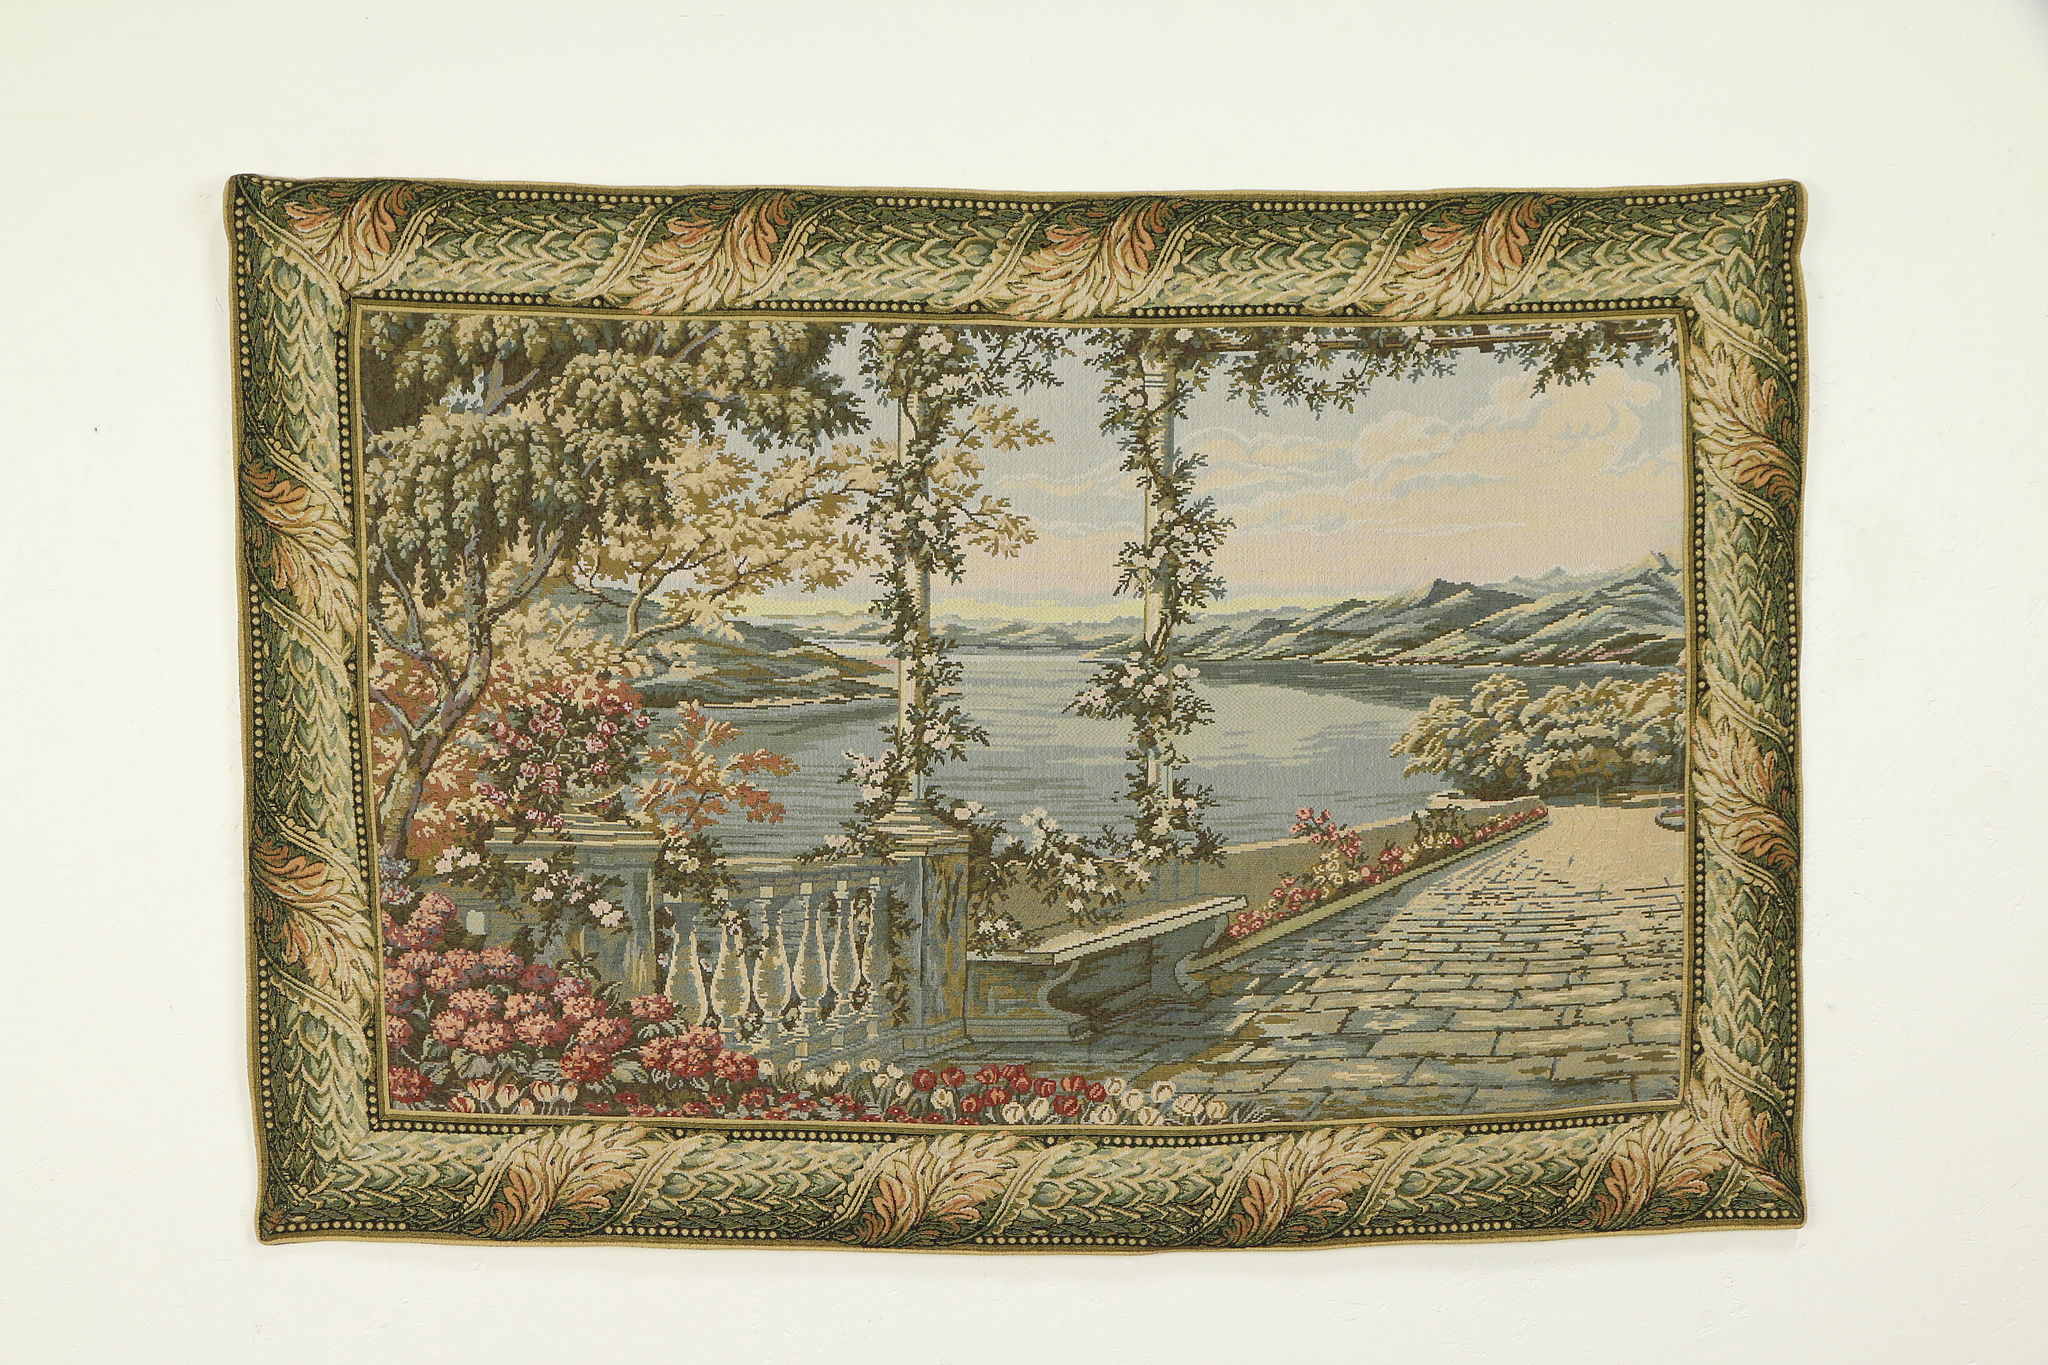 Woven VintageTapestry of a Lake in Northern Italy, Lined